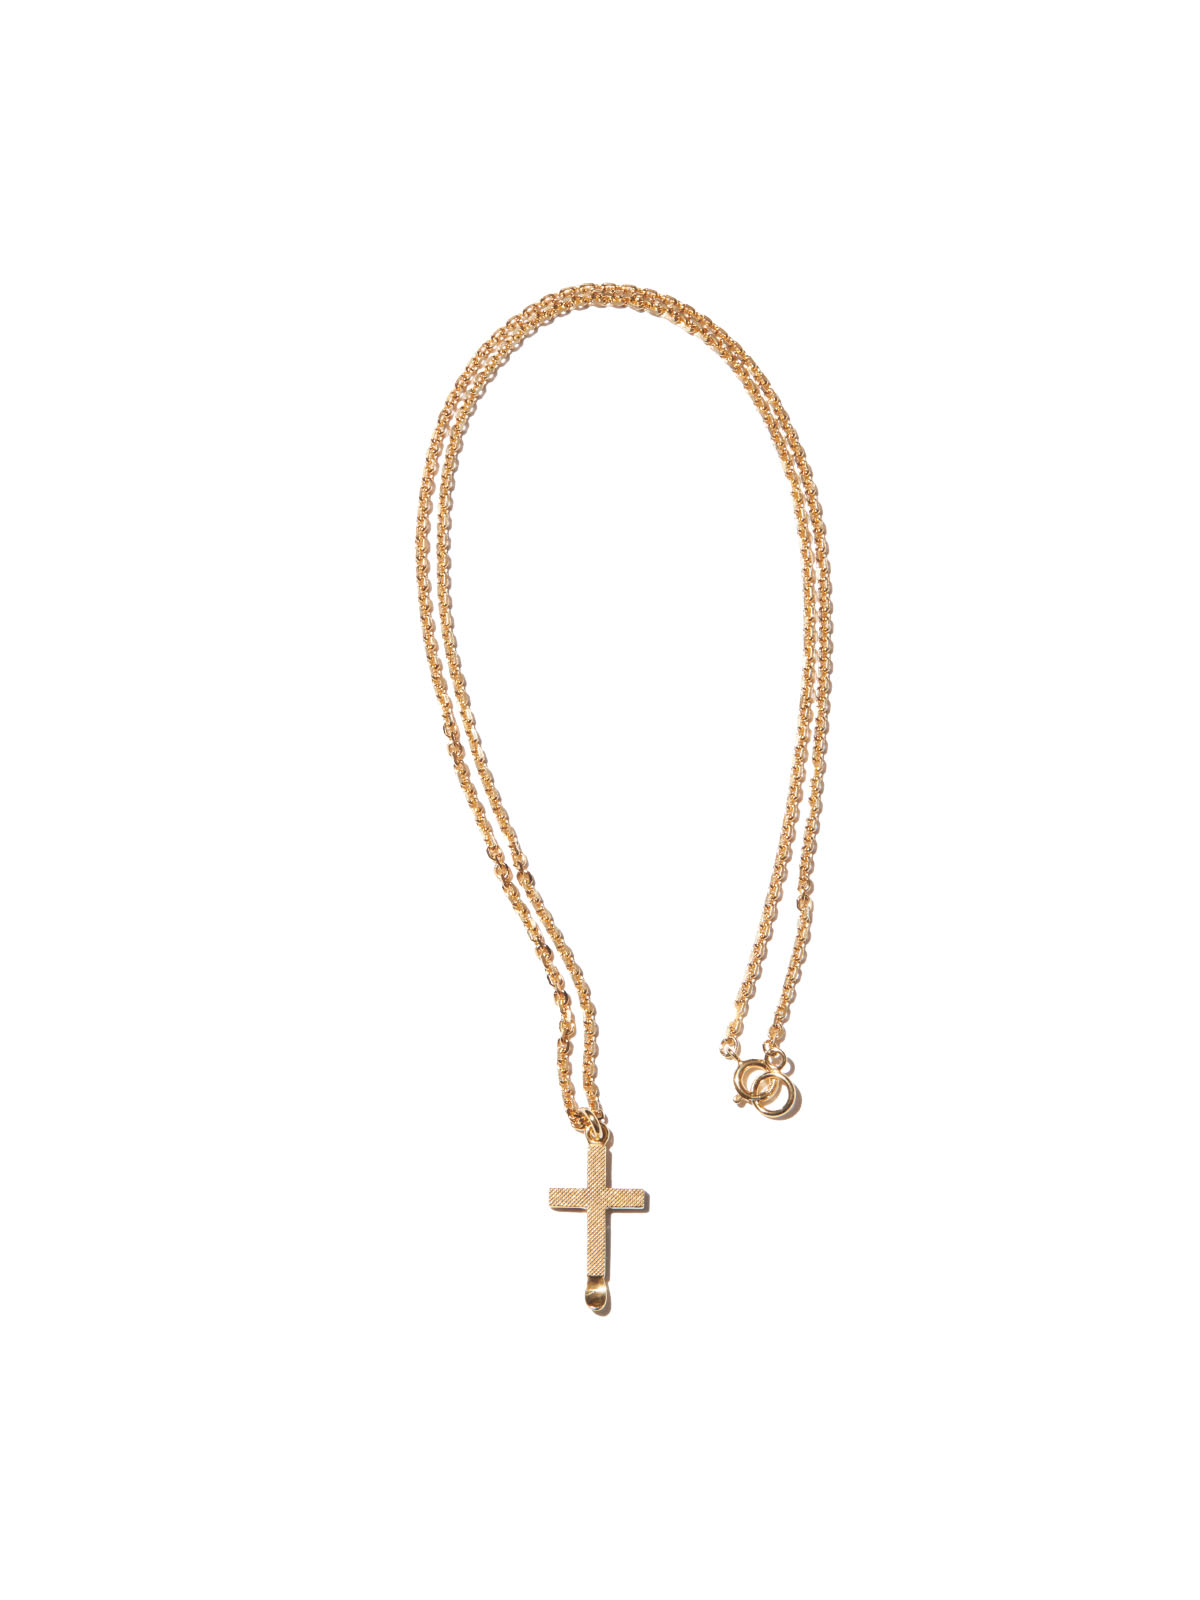 RADIALL SPOON CROSS - NECKLACE (18K Plated) RAD-JWL035-02 公式通販